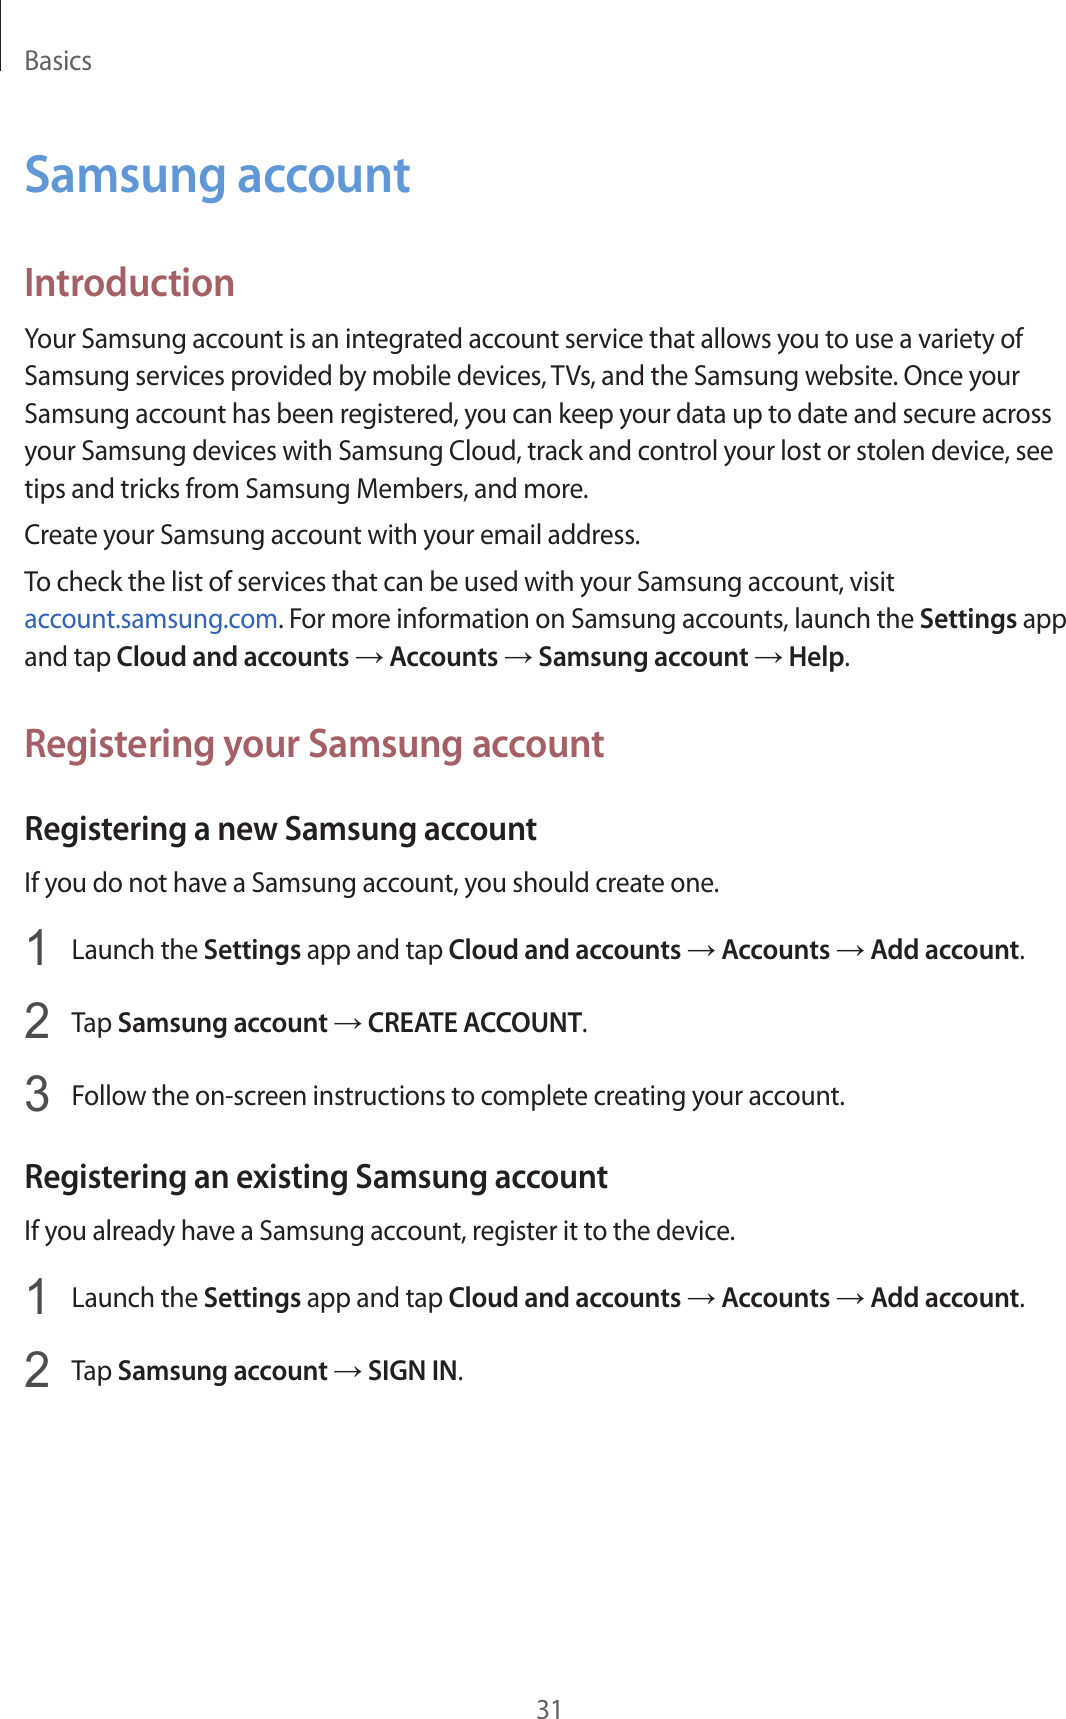 Basics31Samsung accountIntroductionYour Samsung account is an integrated account service that allows you to use a variety of Samsung services provided by mobile devices, TVs, and the Samsung website. Once your Samsung account has been registered, you can keep your data up to date and secure across your Samsung devices with Samsung Cloud, track and control your lost or stolen device, see tips and tricks from Samsung Members, and more.Create your Samsung account with your email address.To check the list of services that can be used with your Samsung account, visit account.samsung.com. For more information on Samsung accounts, launch the Settings app and tap Cloud and accounts → Accounts → Samsung account → Help.Registering your Samsung accountRegistering a new Samsung accountIf you do not have a Samsung account, you should create one.1  Launch the Settings app and tap Cloud and accounts → Accounts → Add account.2  Tap Samsung account → CREATE ACCOUNT.3  Follow the on-screen instructions to complete creating your account.Registering an existing Samsung accountIf you already have a Samsung account, register it to the device.1  Launch the Settings app and tap Cloud and accounts → Accounts → Add account.2  Tap Samsung account → SIGN IN.